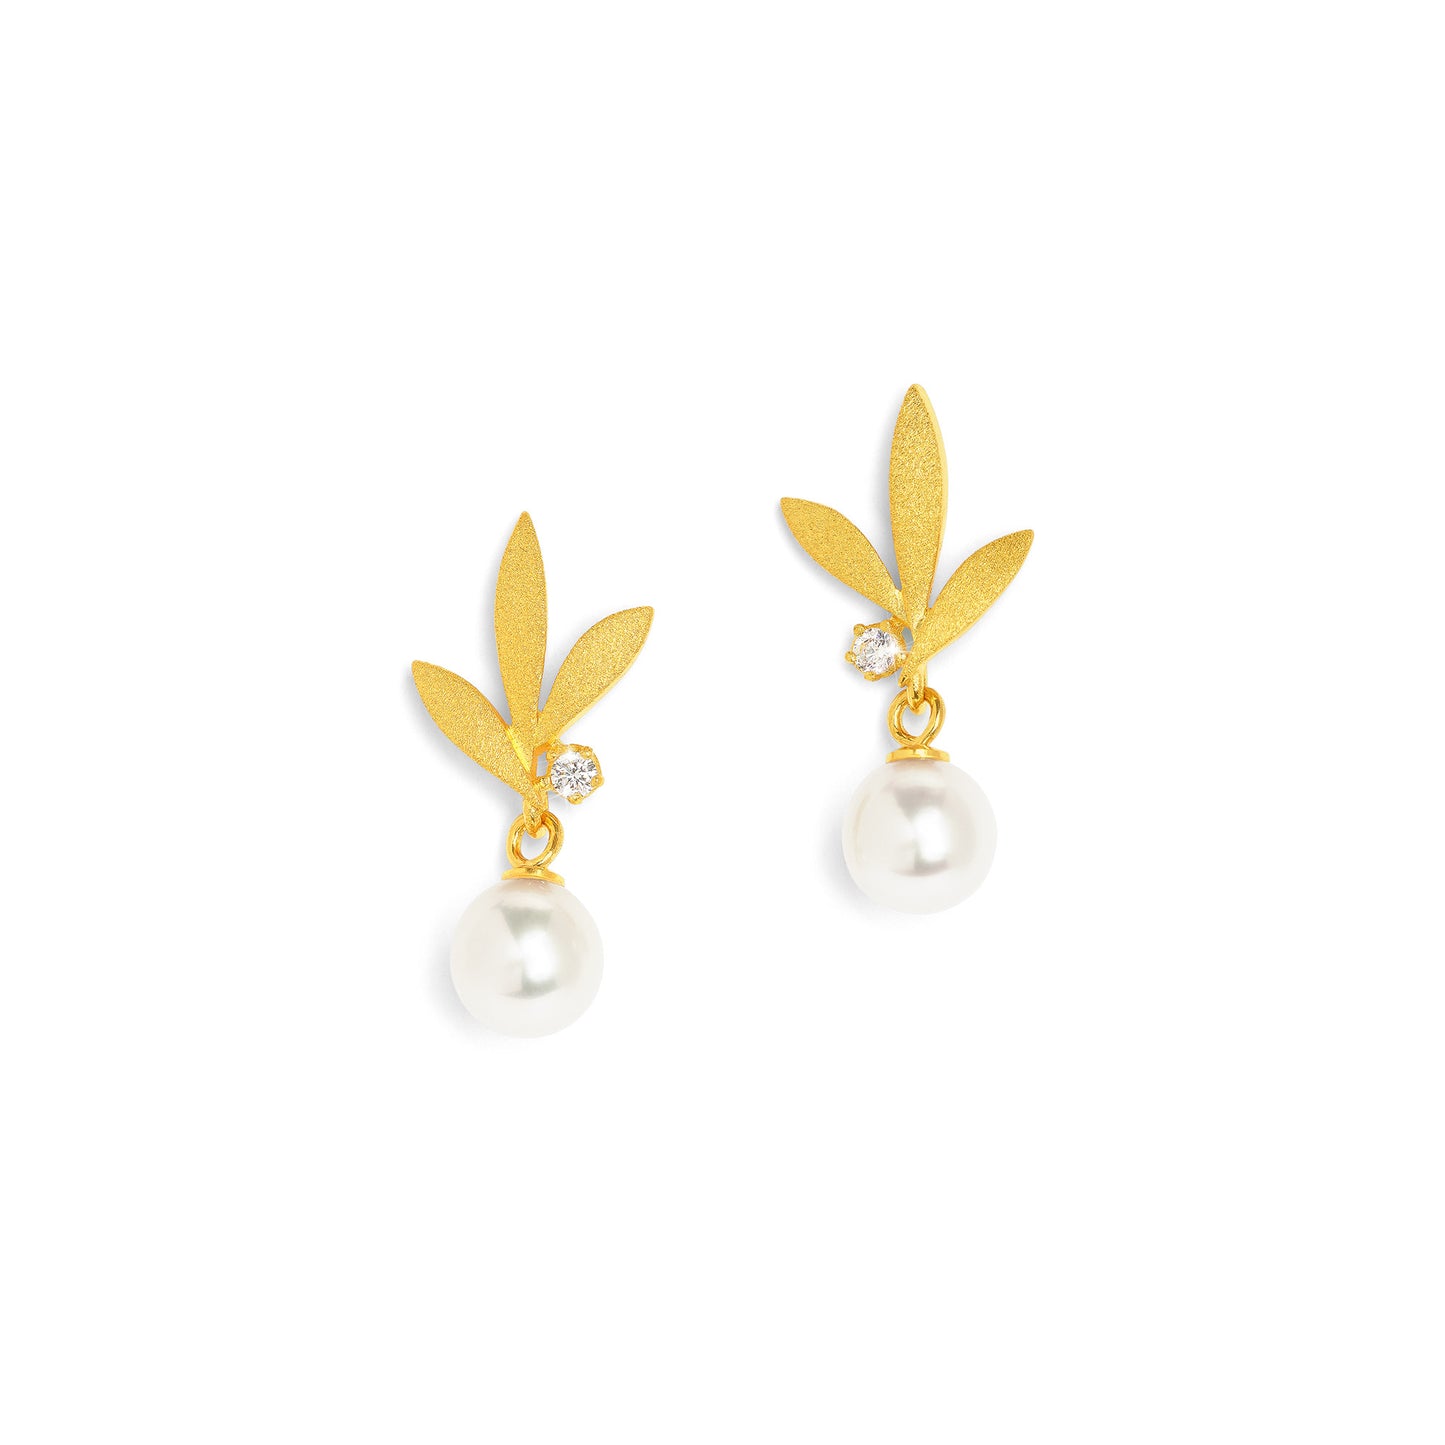 Bernd Wolf Collection "Strelias" Pearl & CZ Earrings